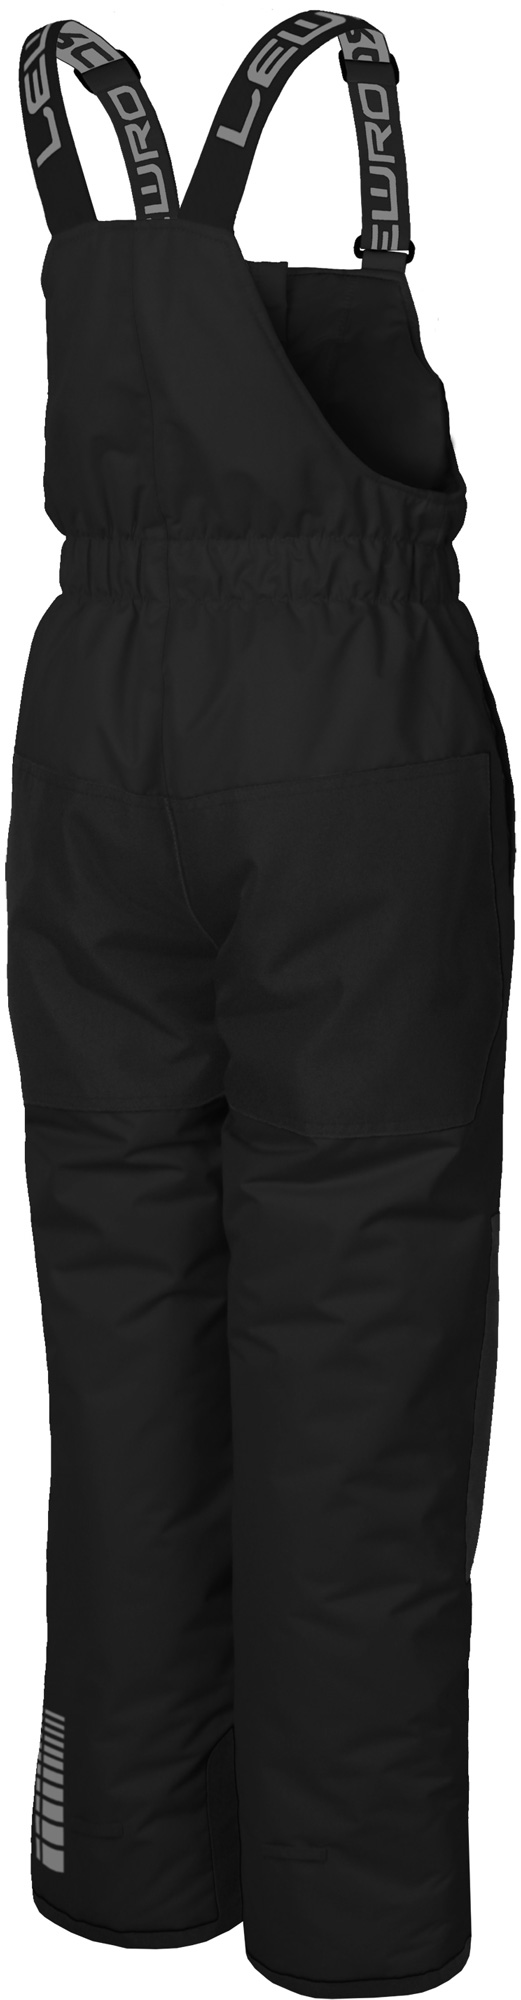 Insulated kids’ trousers